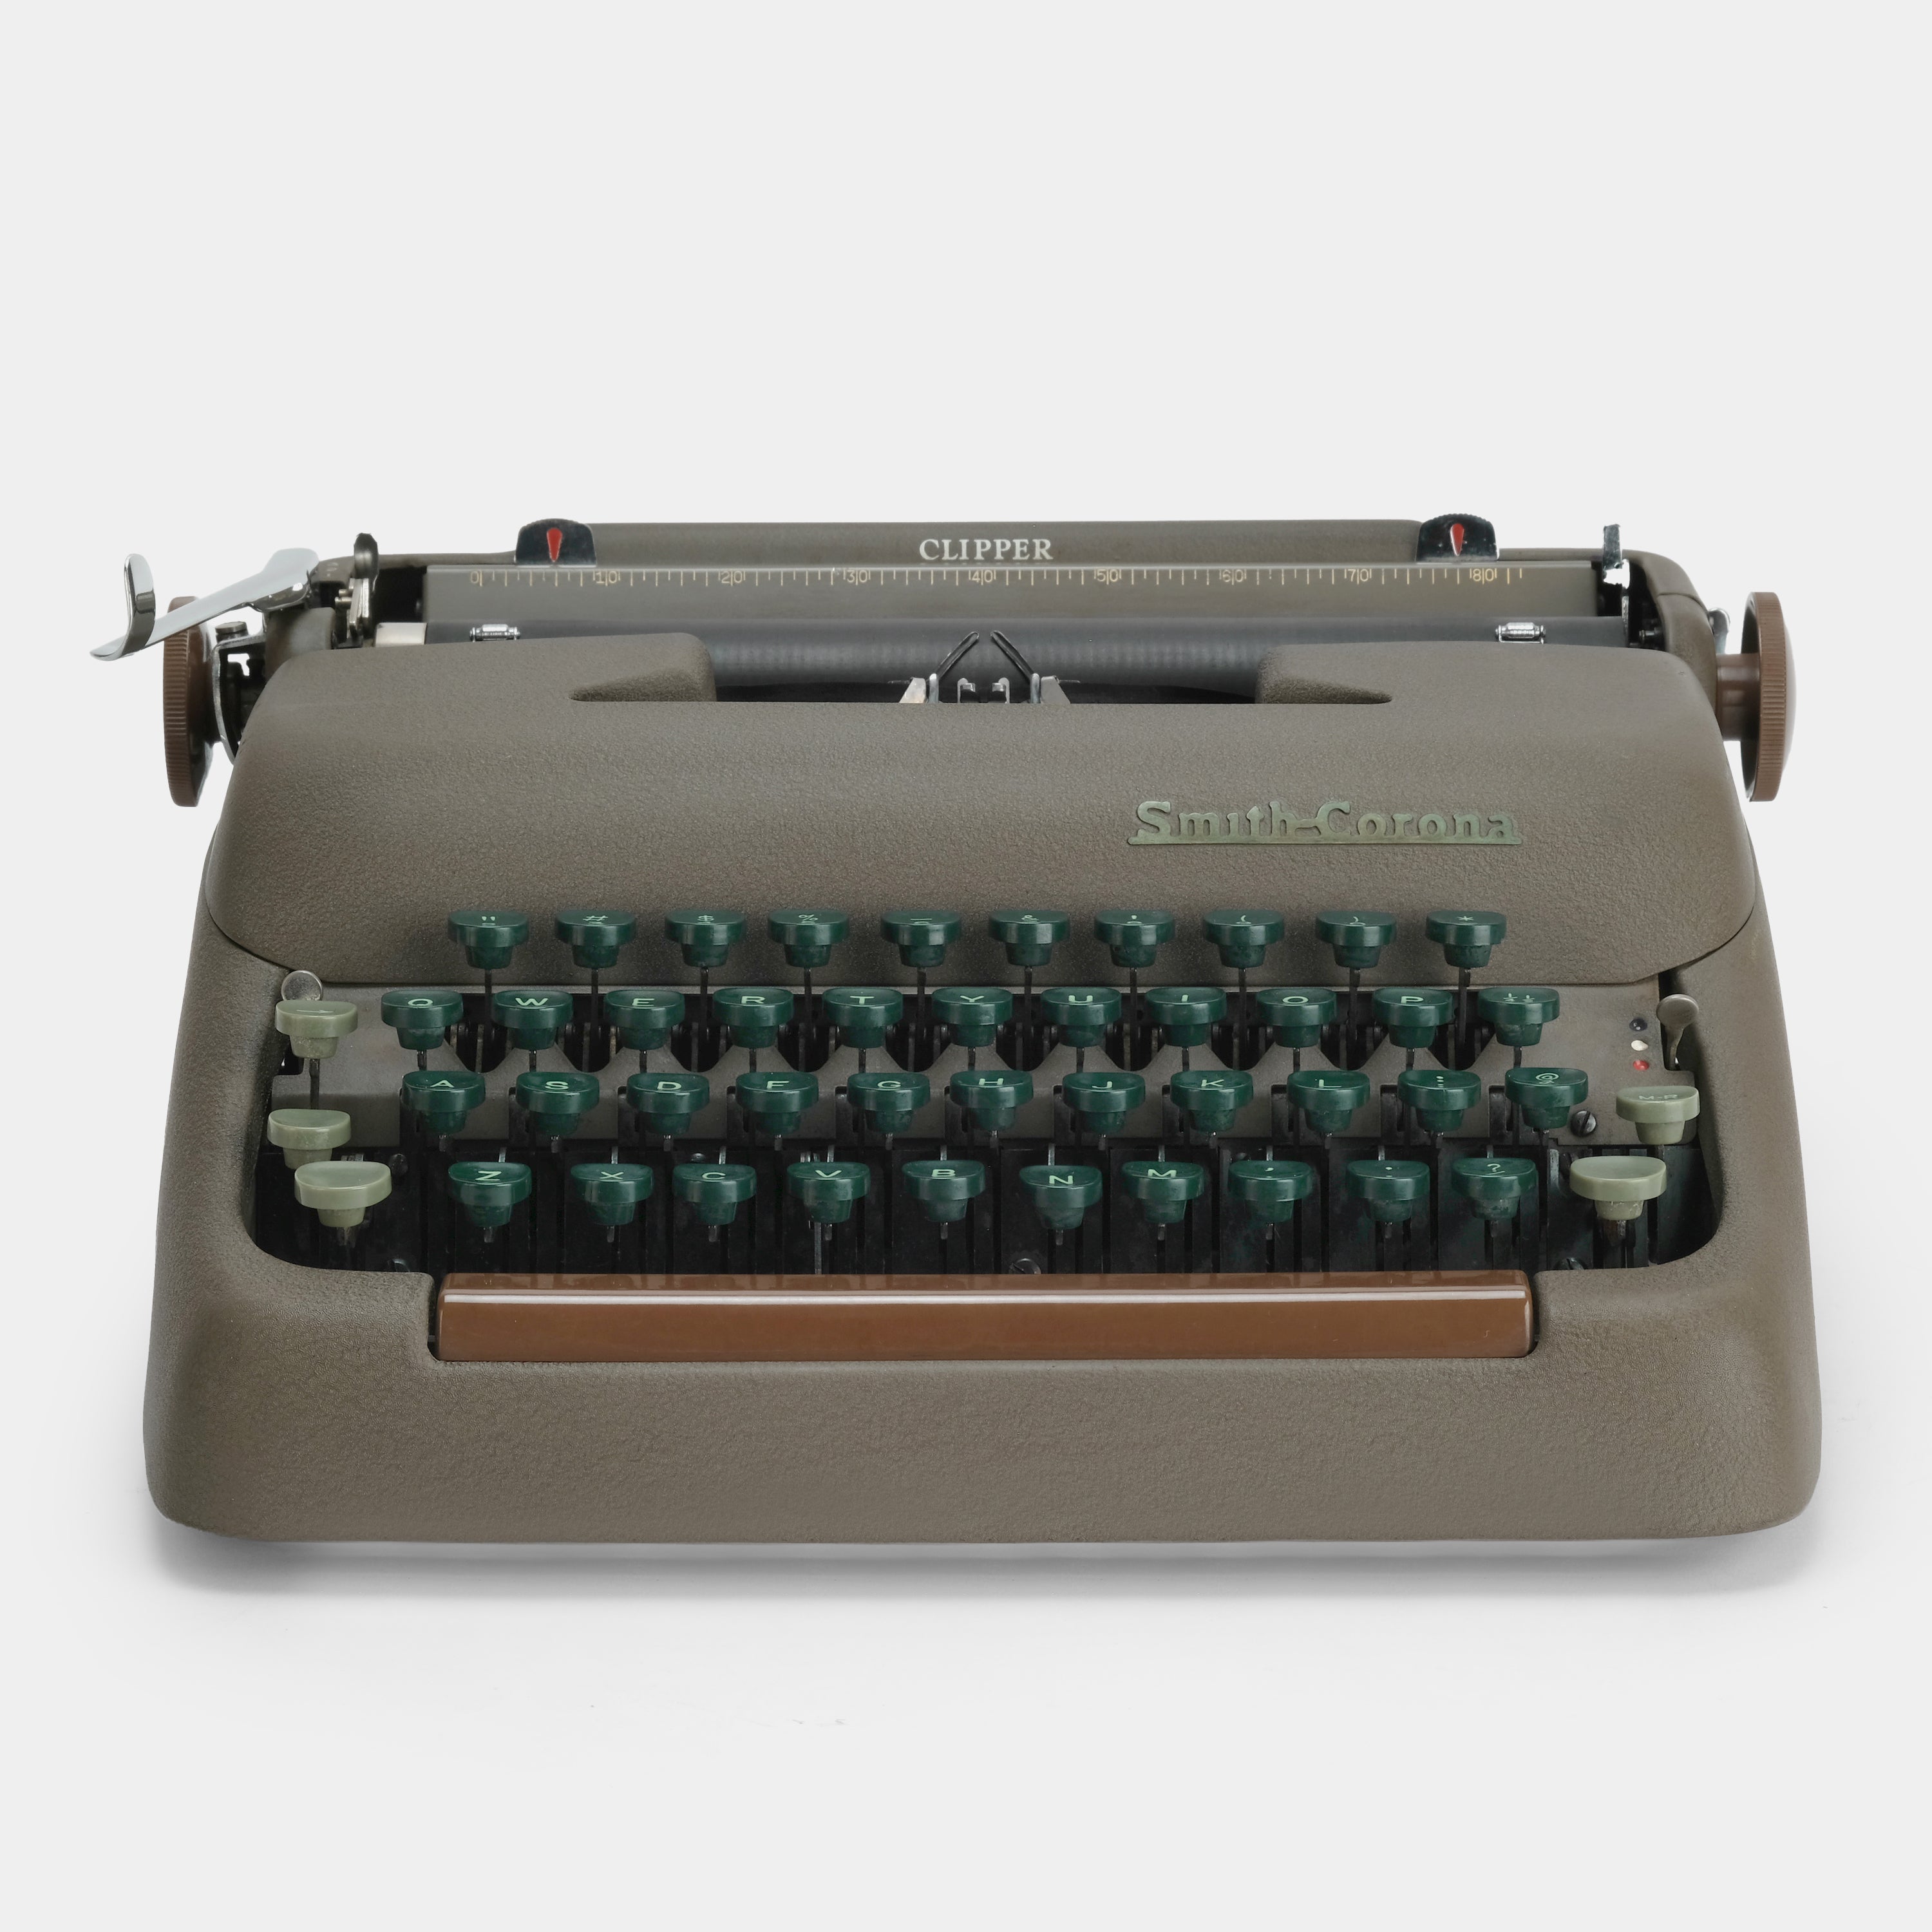 Smith-Corona Clipper Brown and Green Manual Typewriter and Case